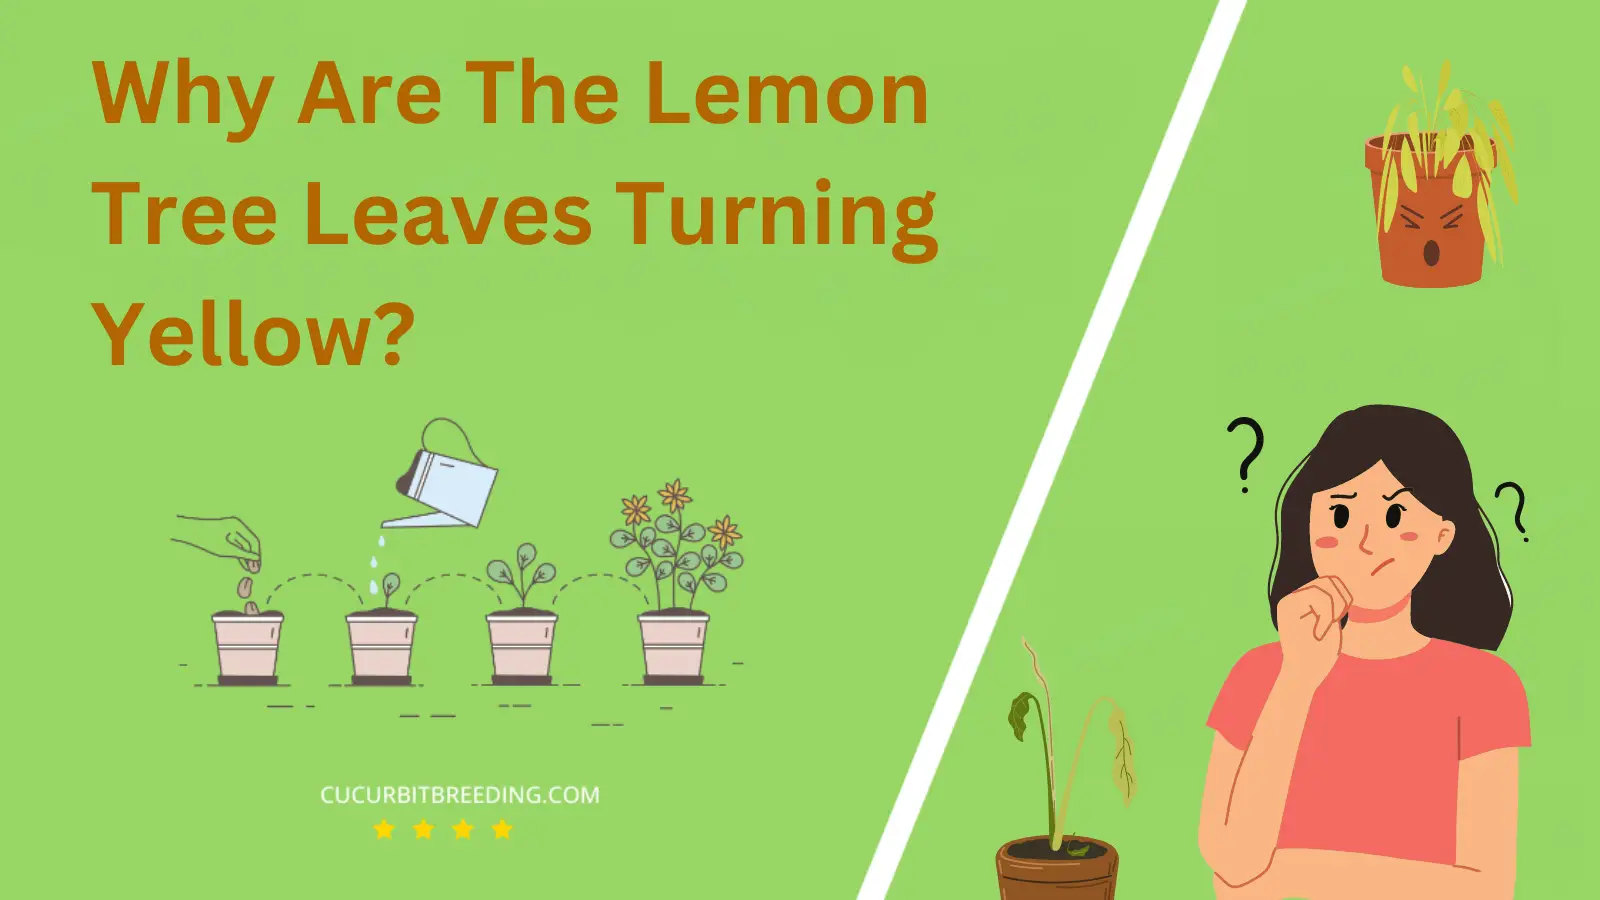 Why Are The Lemon Tree Leaves Turning Yellow